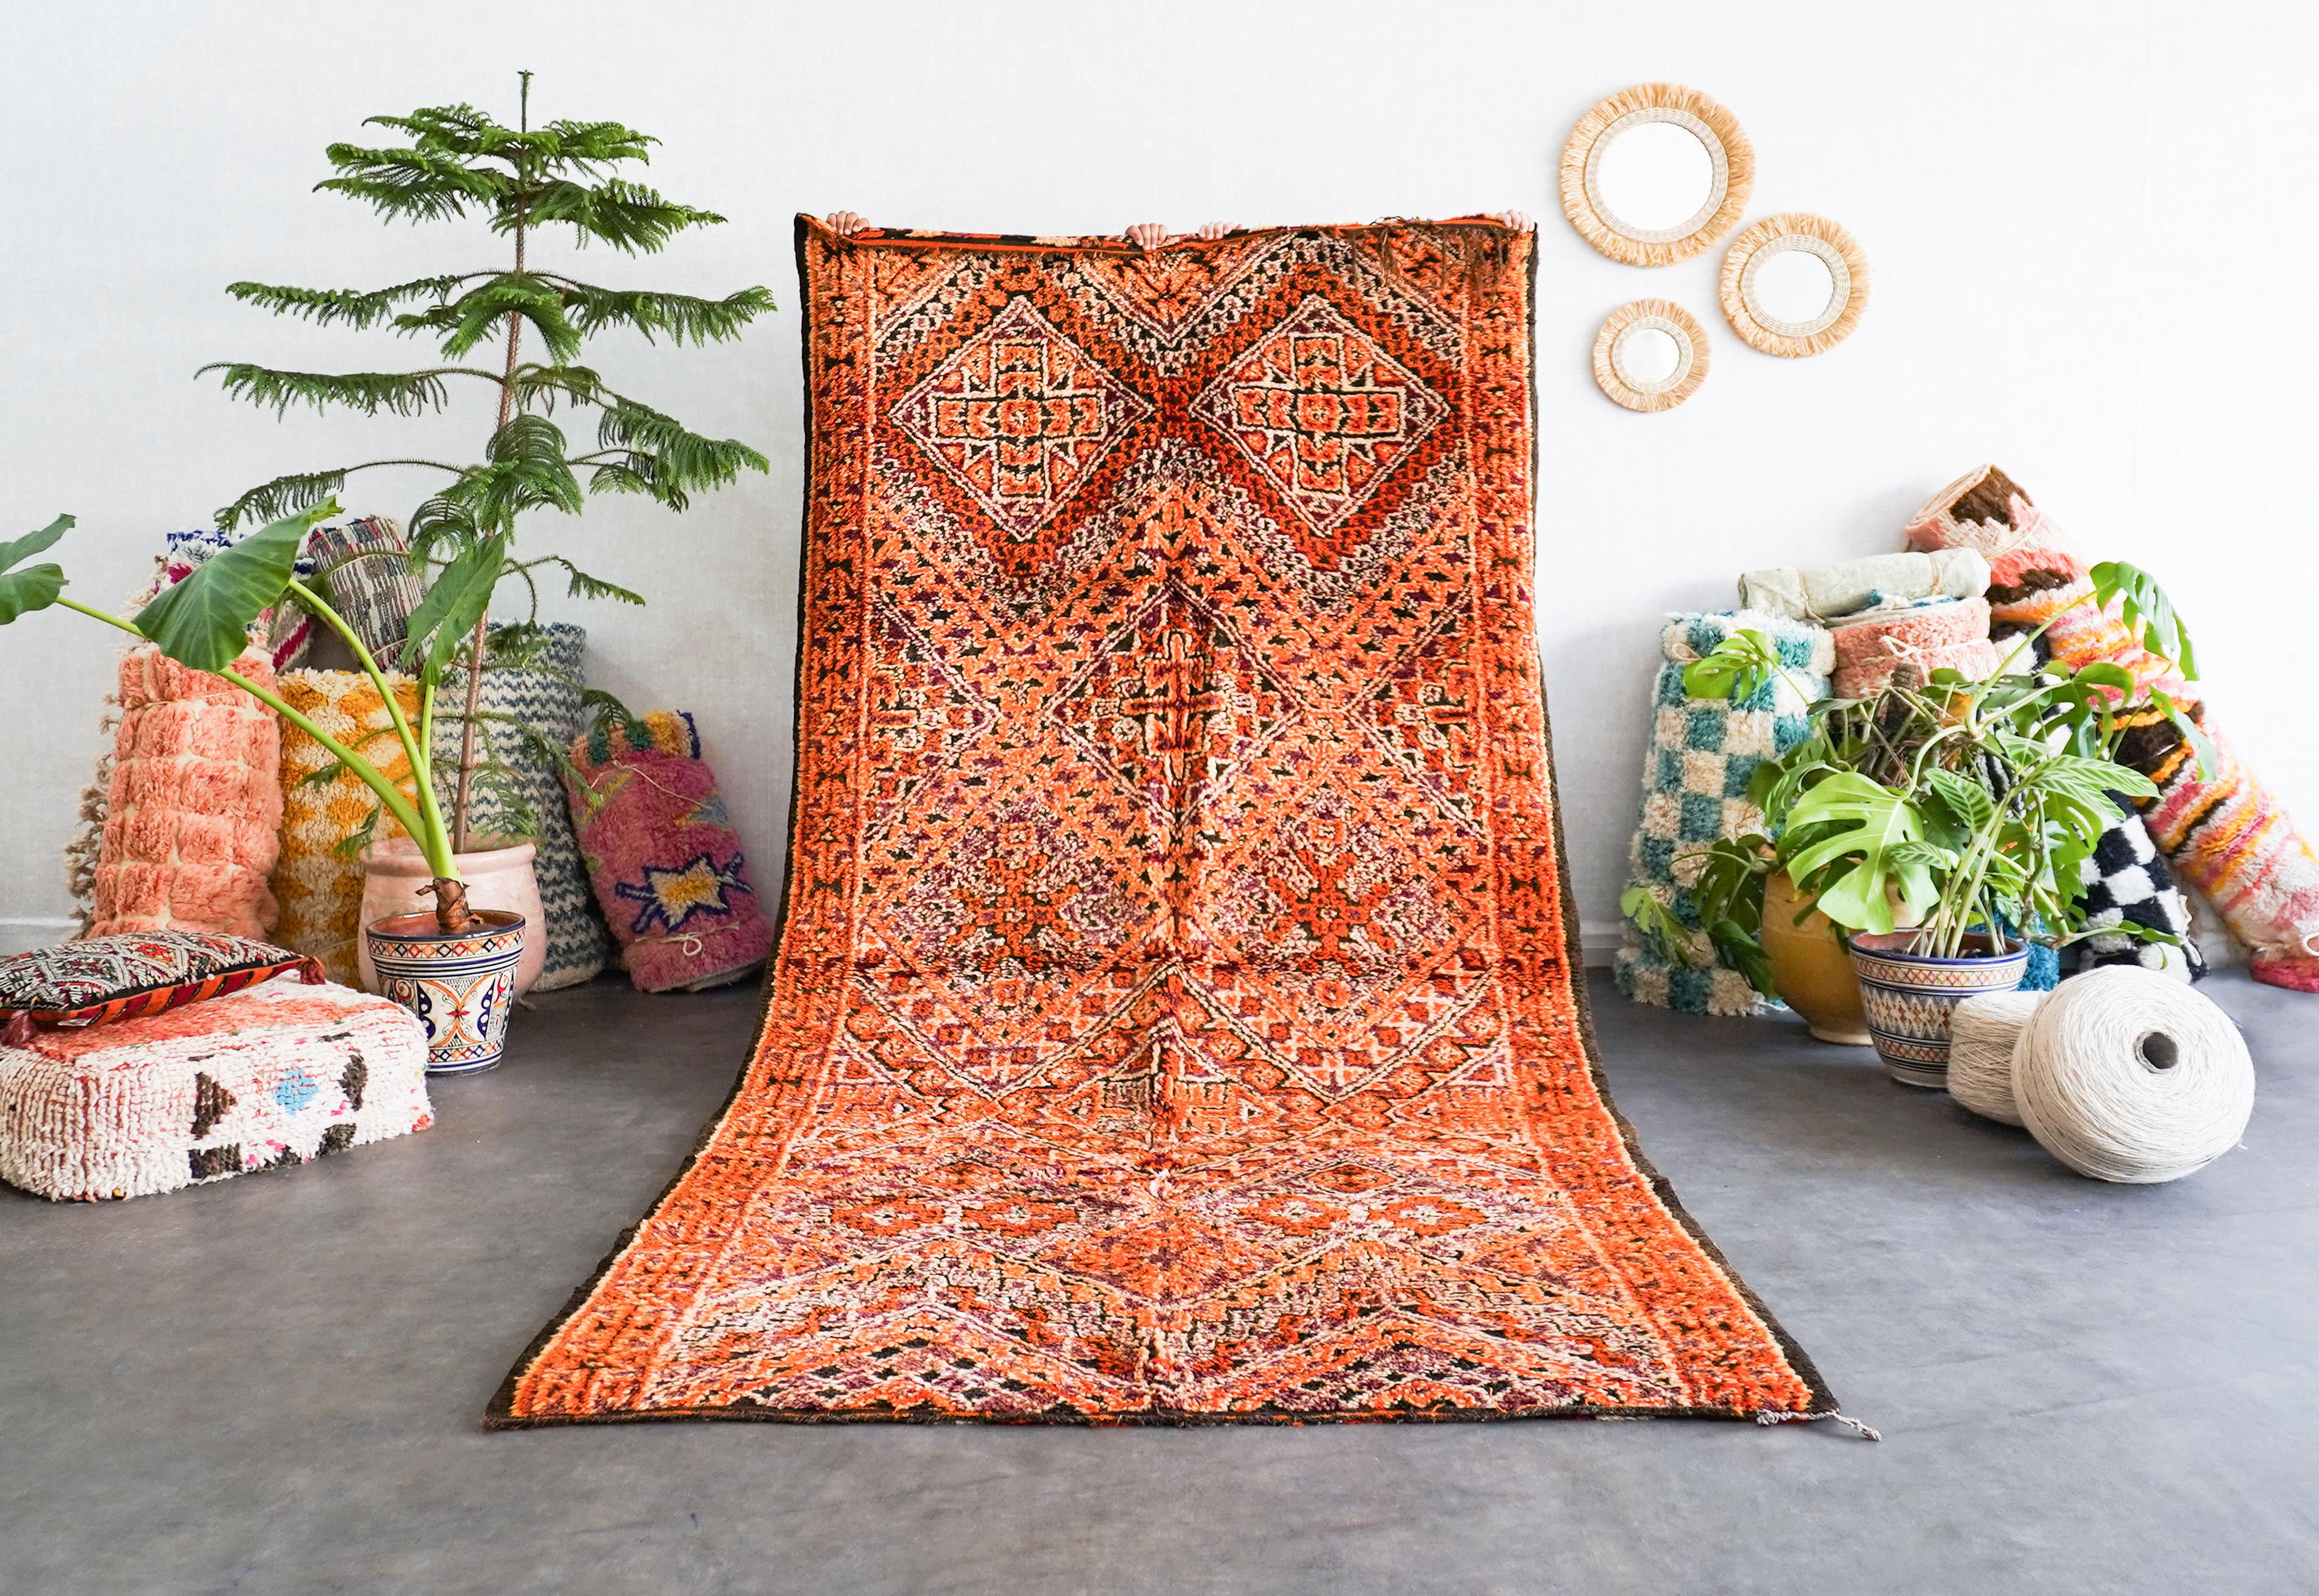 Uncover the rich heritage woven into our orange Moroccan vintage rug. Handmade by skilled artisans using time-tested techniques, each Berber rug is a unique narrative, echoing the cultural tapestry of Morocco. With intricate geometric patterns and a